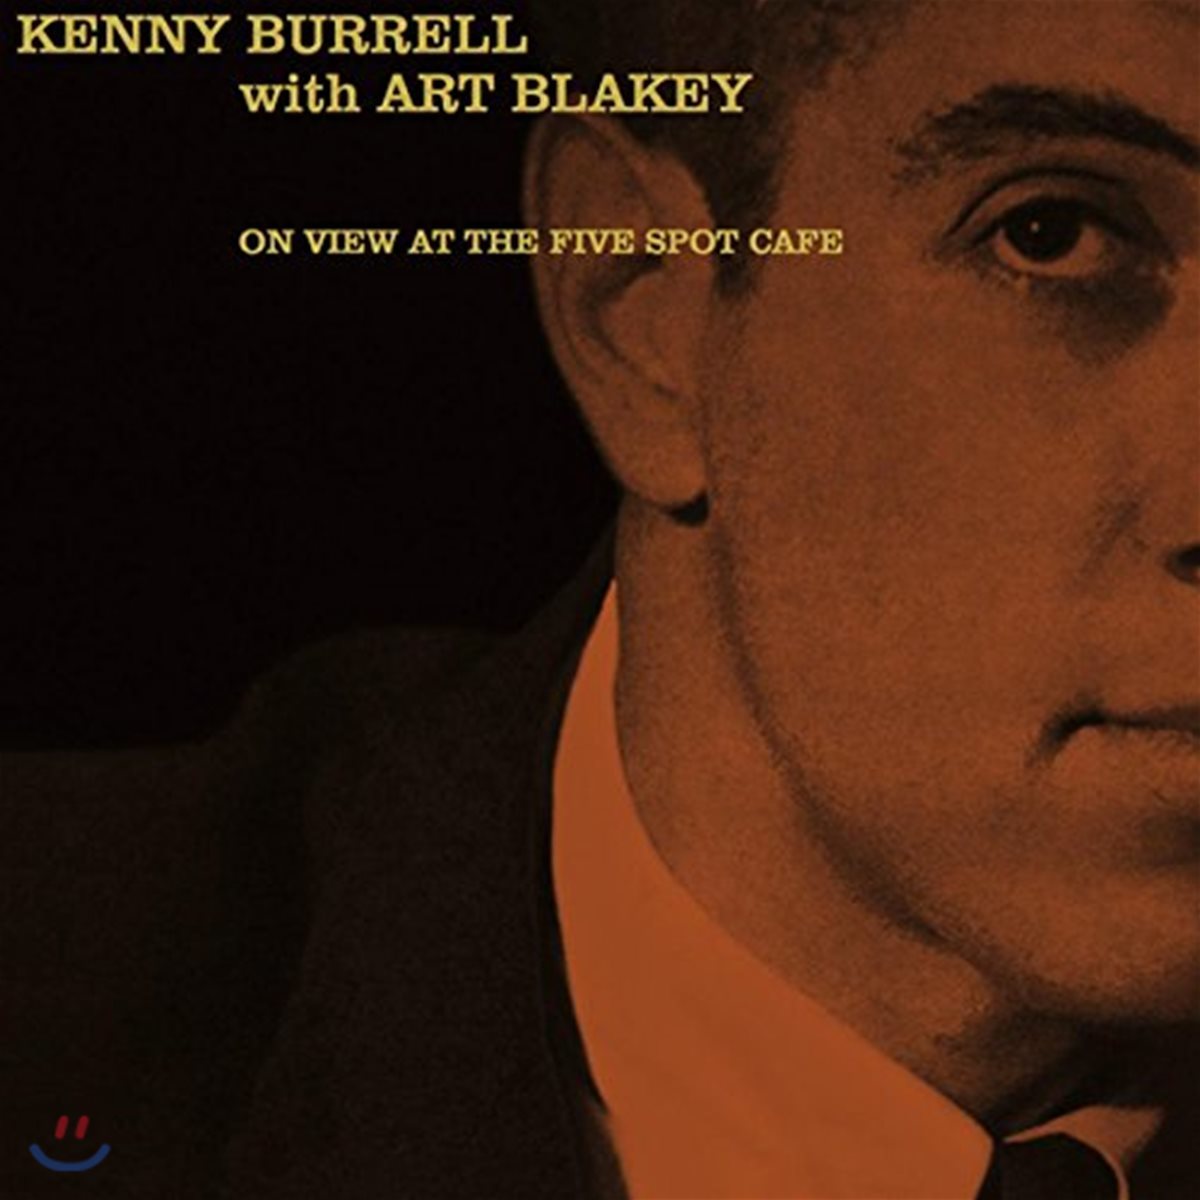 Kenny Burrell & Art Blakey (케니 버렐 & 아트 블래키) - On View At The Five Spot Cafe [LP]